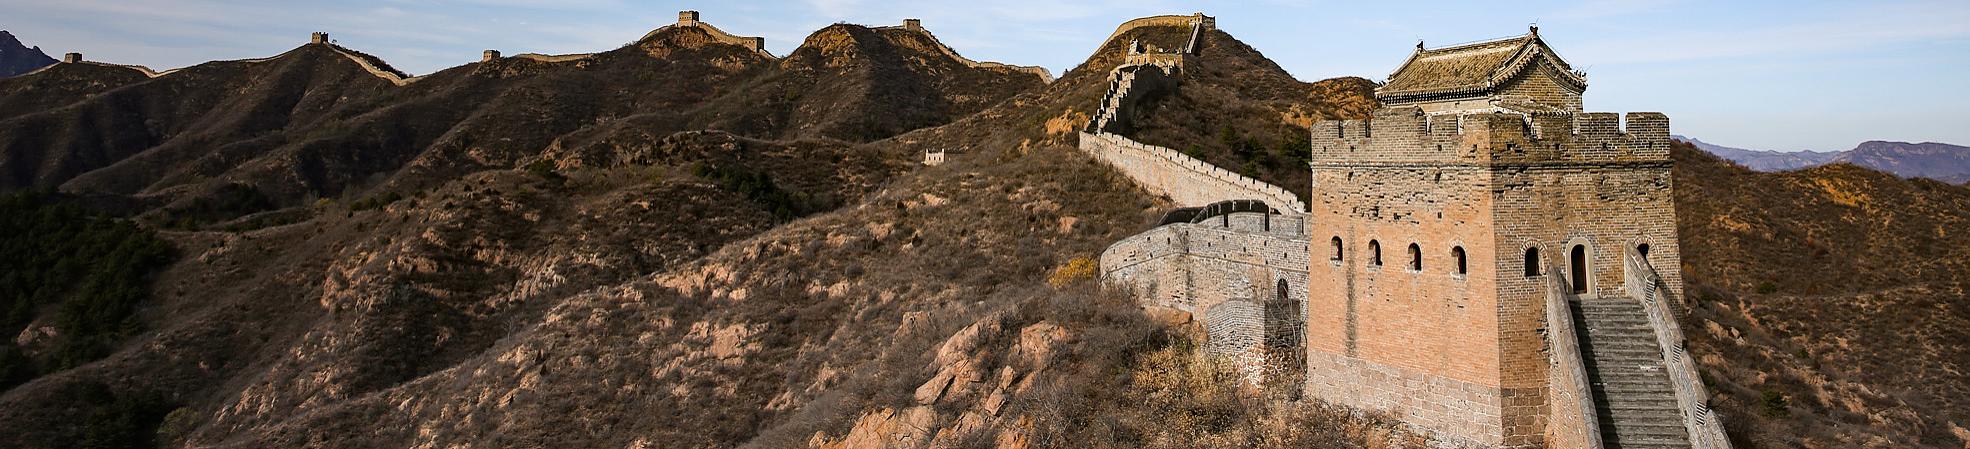 How to Choose Your Best Part of the Great Wall